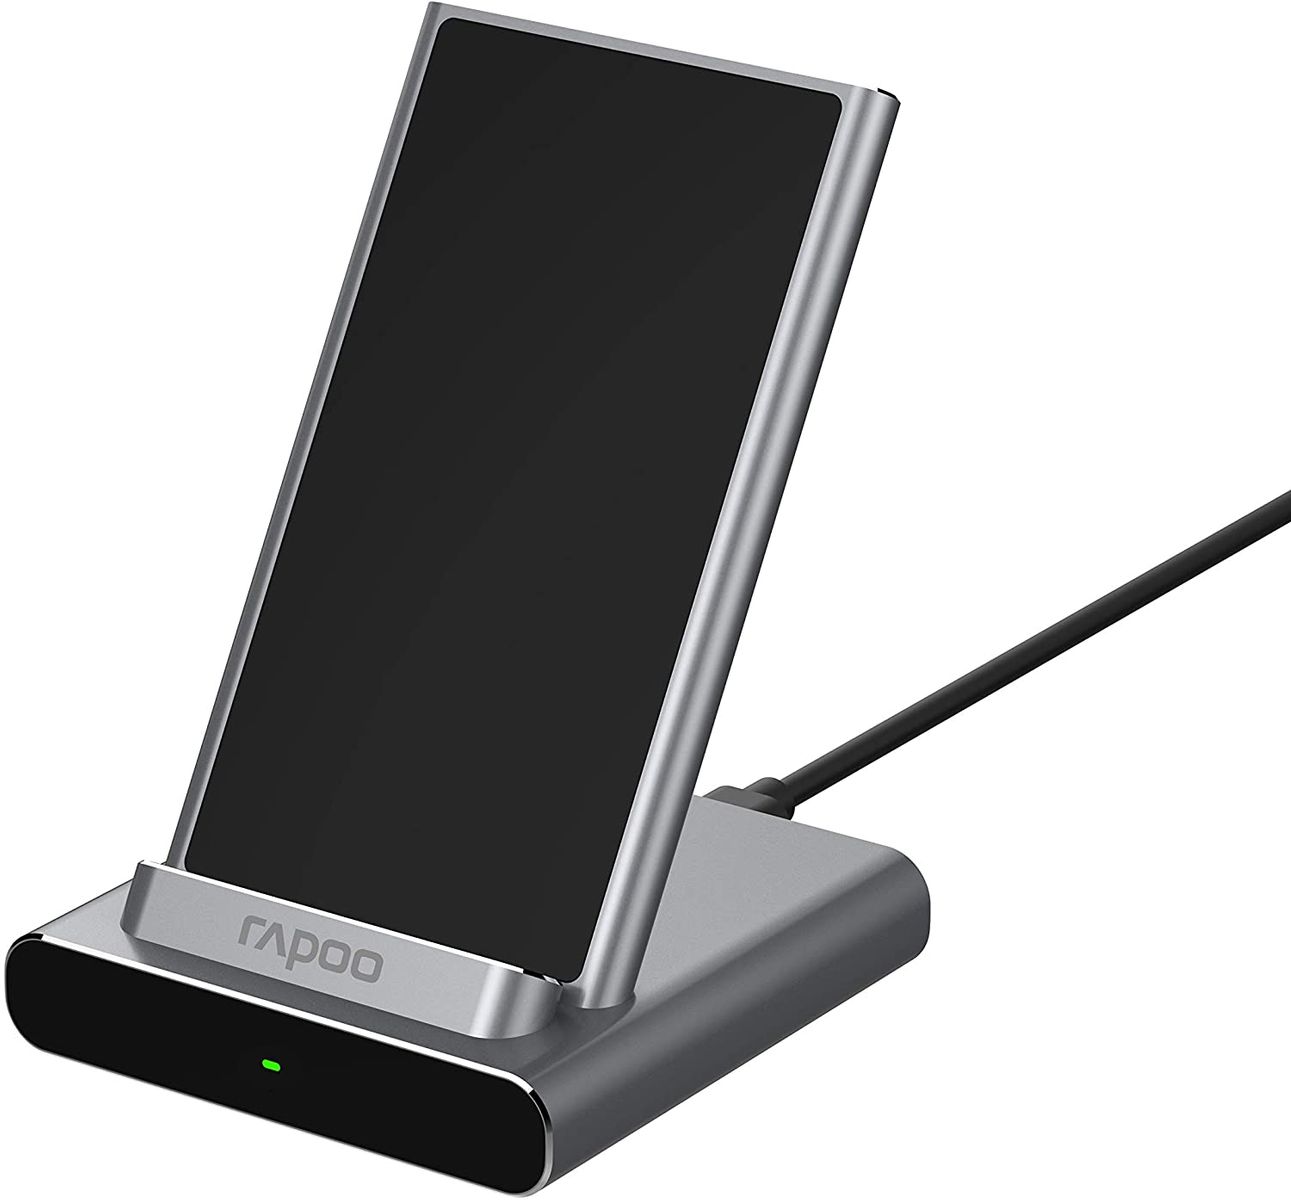 Rapoo XC350 Wireless Induction Charger for Smartphone iOS Android